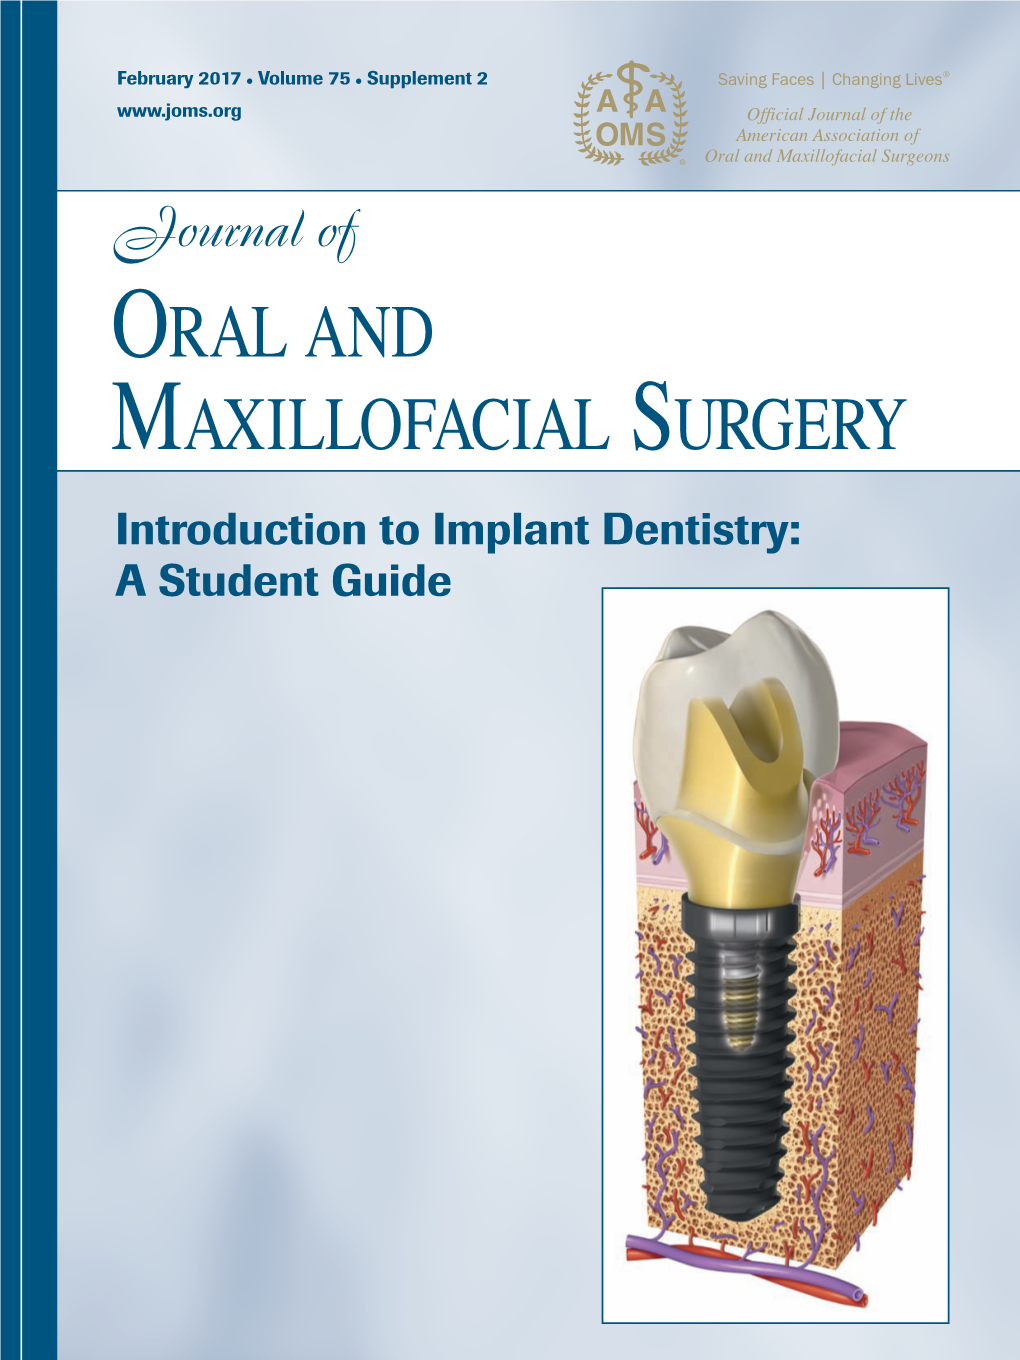 Introduction to Implant Dentistry: a Student Guide